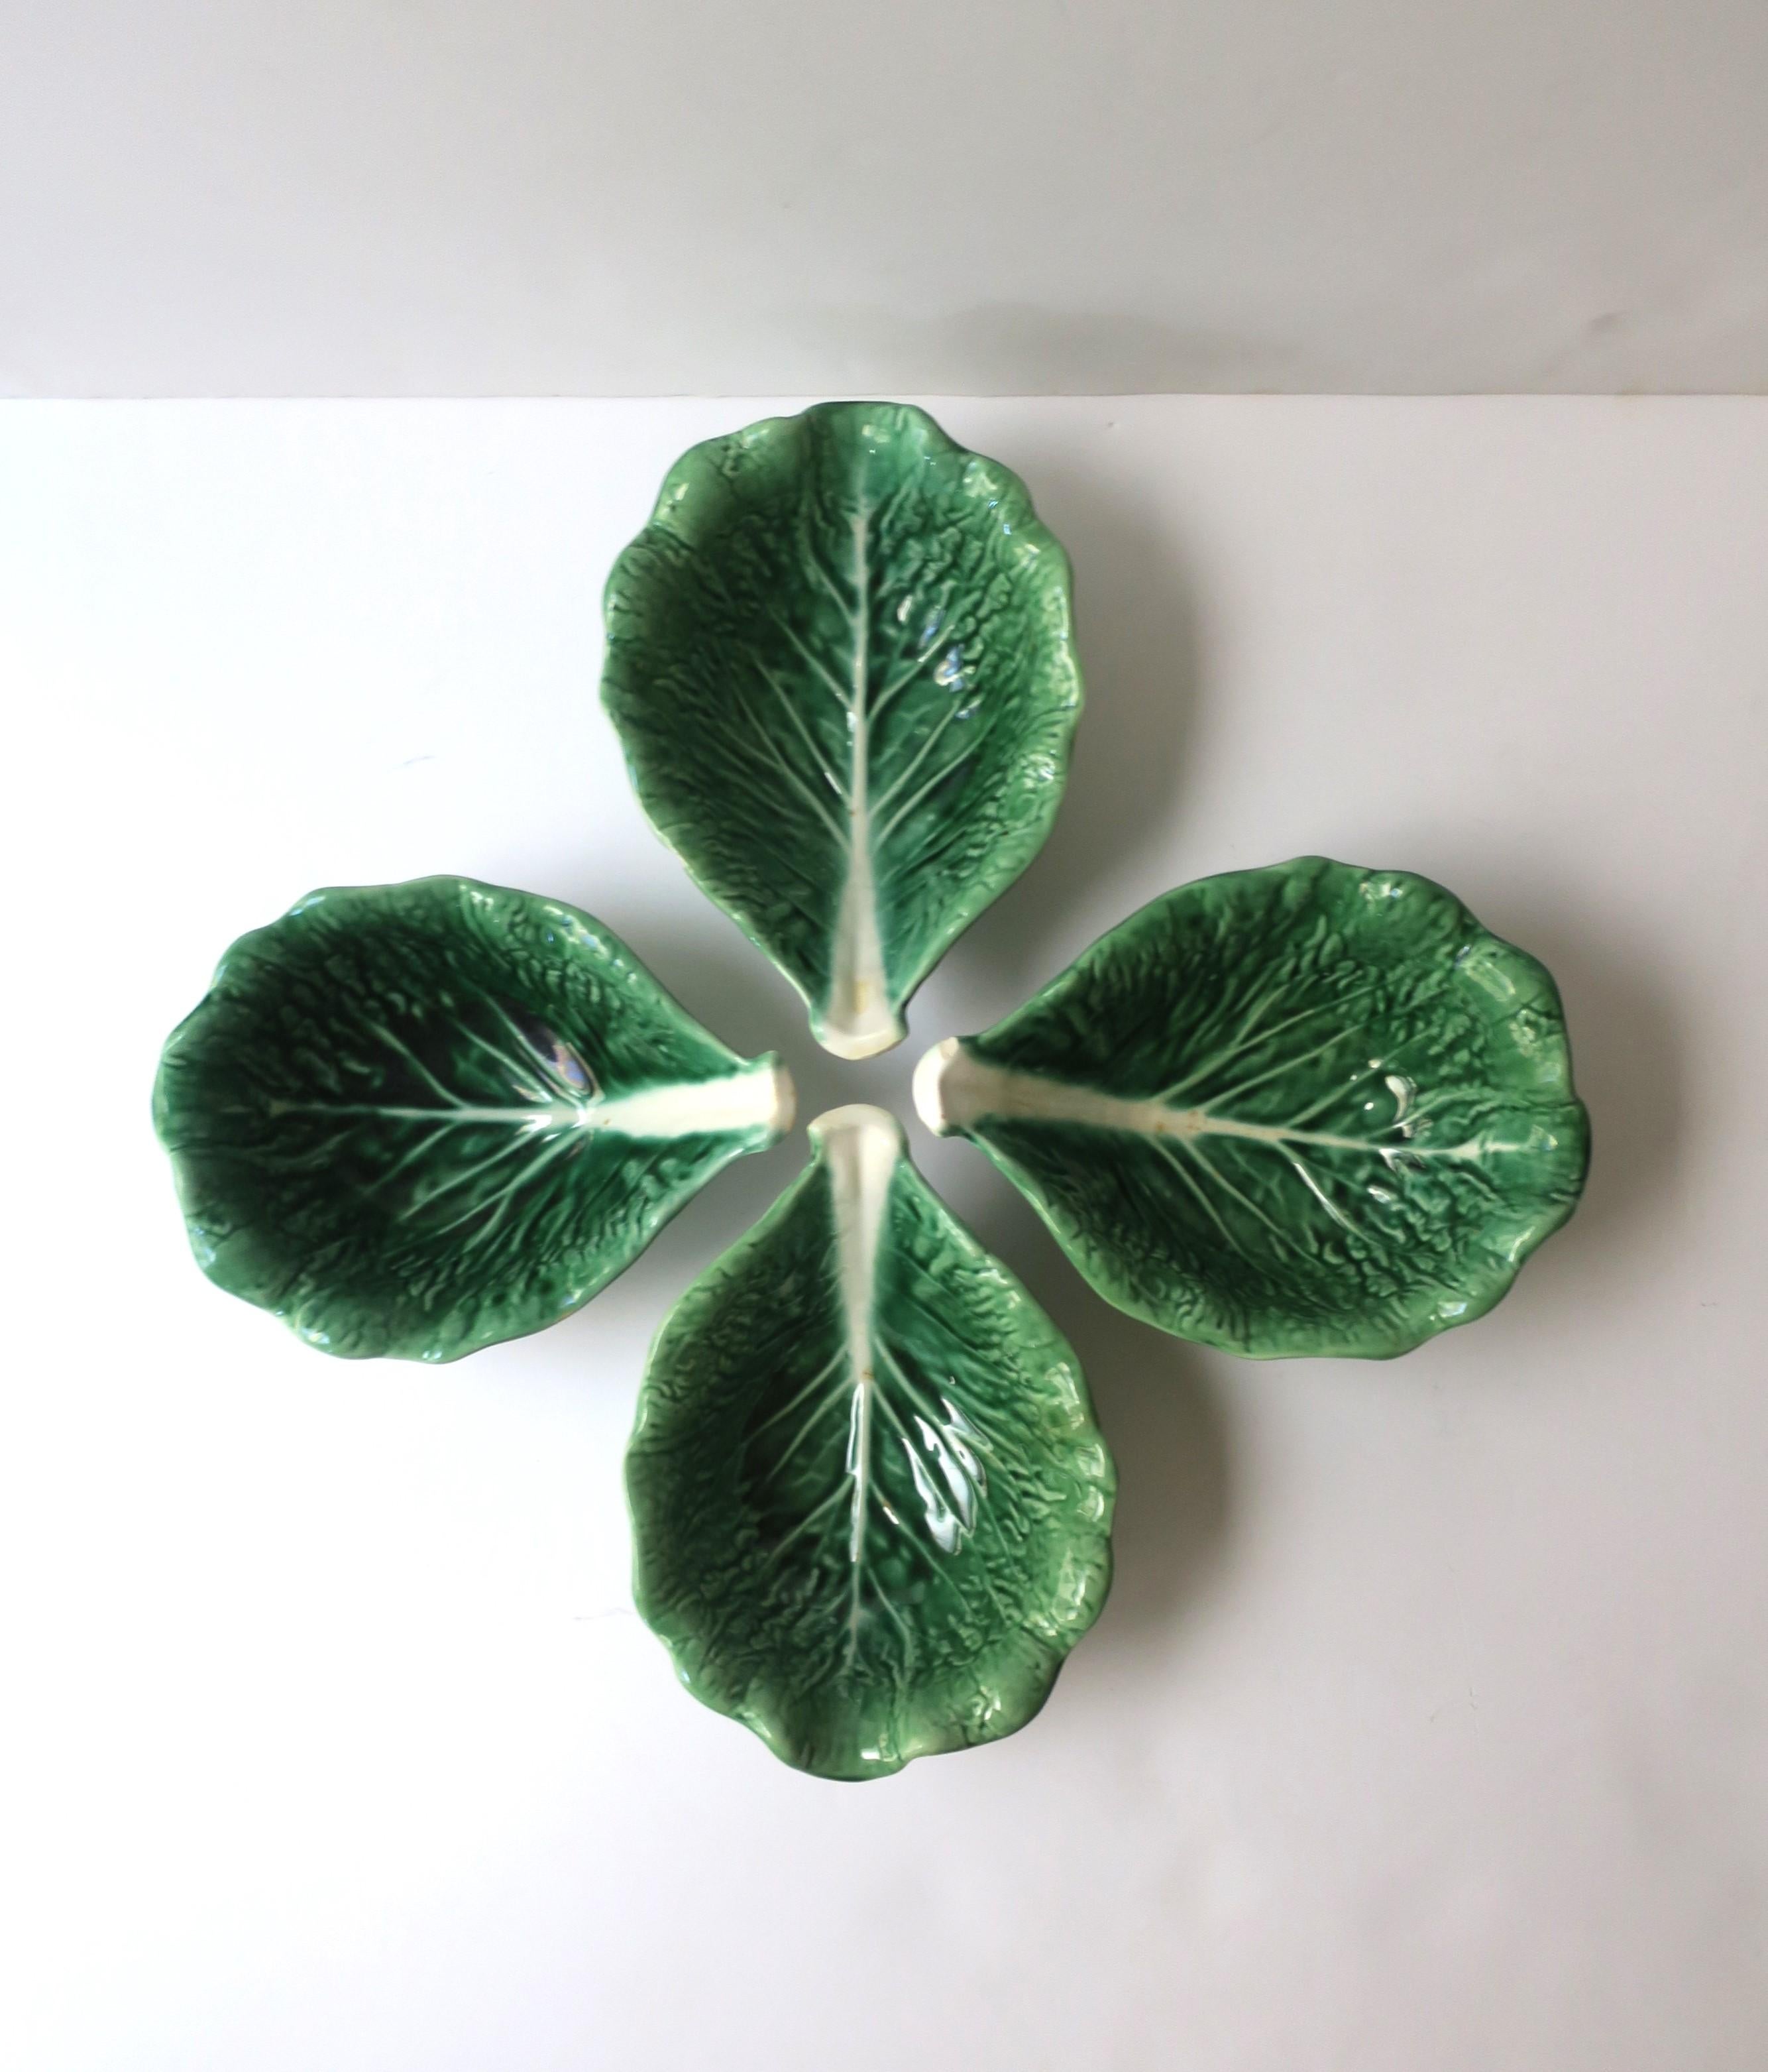 Green Lettuce or Cabbage Leaf Serving or Dip Bowl Trompe l'Oeil Style, 5 Avail In Good Condition For Sale In New York, NY